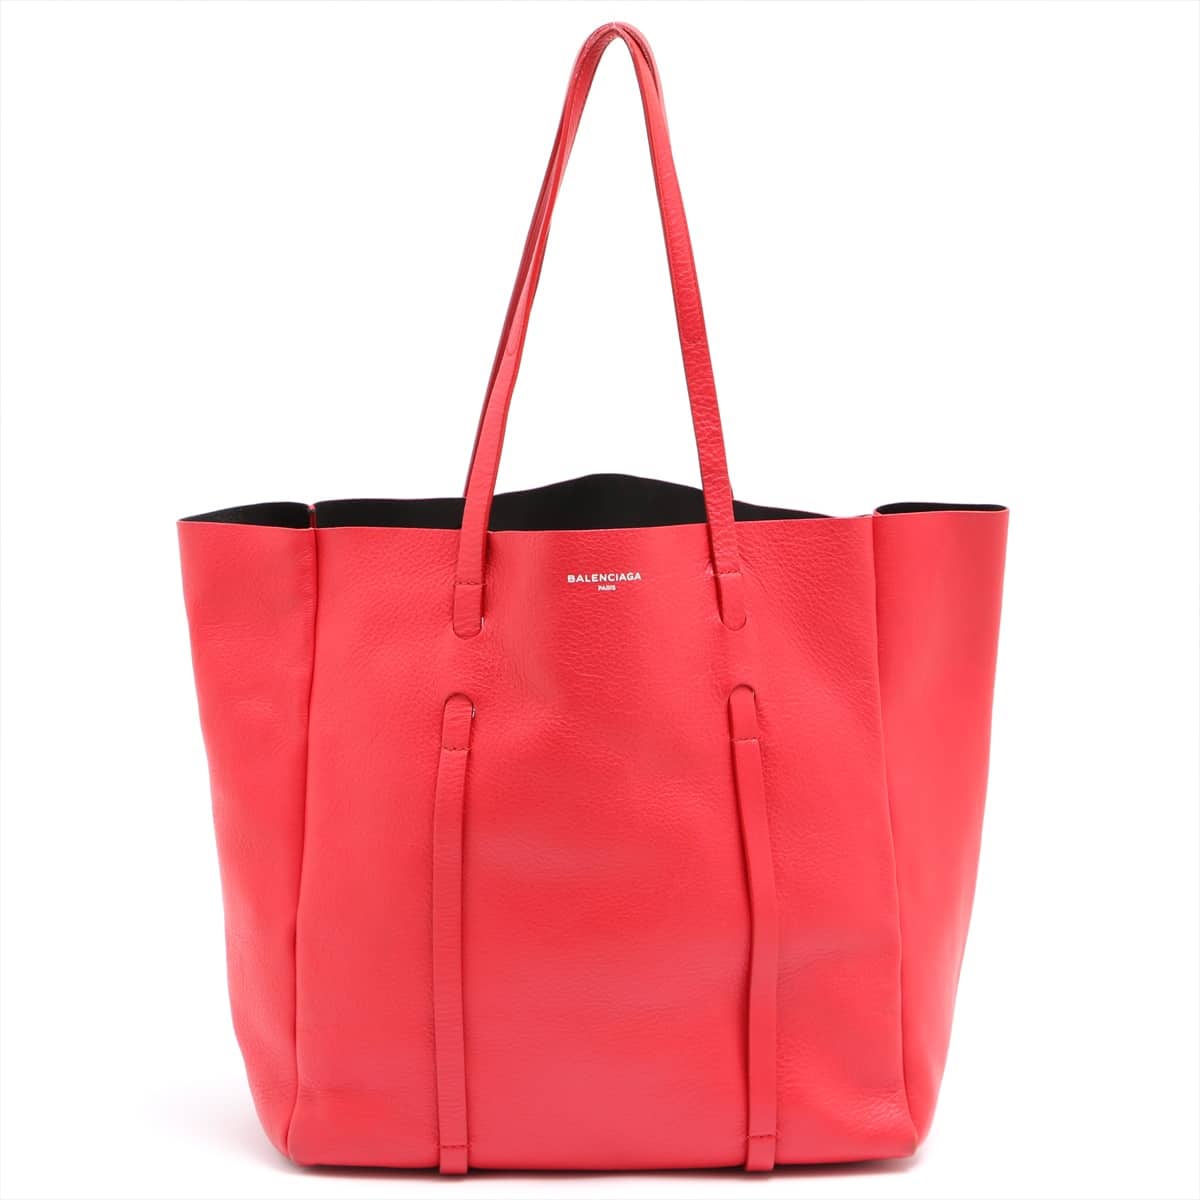 Balenciaga Everyday Leather Tote bag Red 475199 with pouch